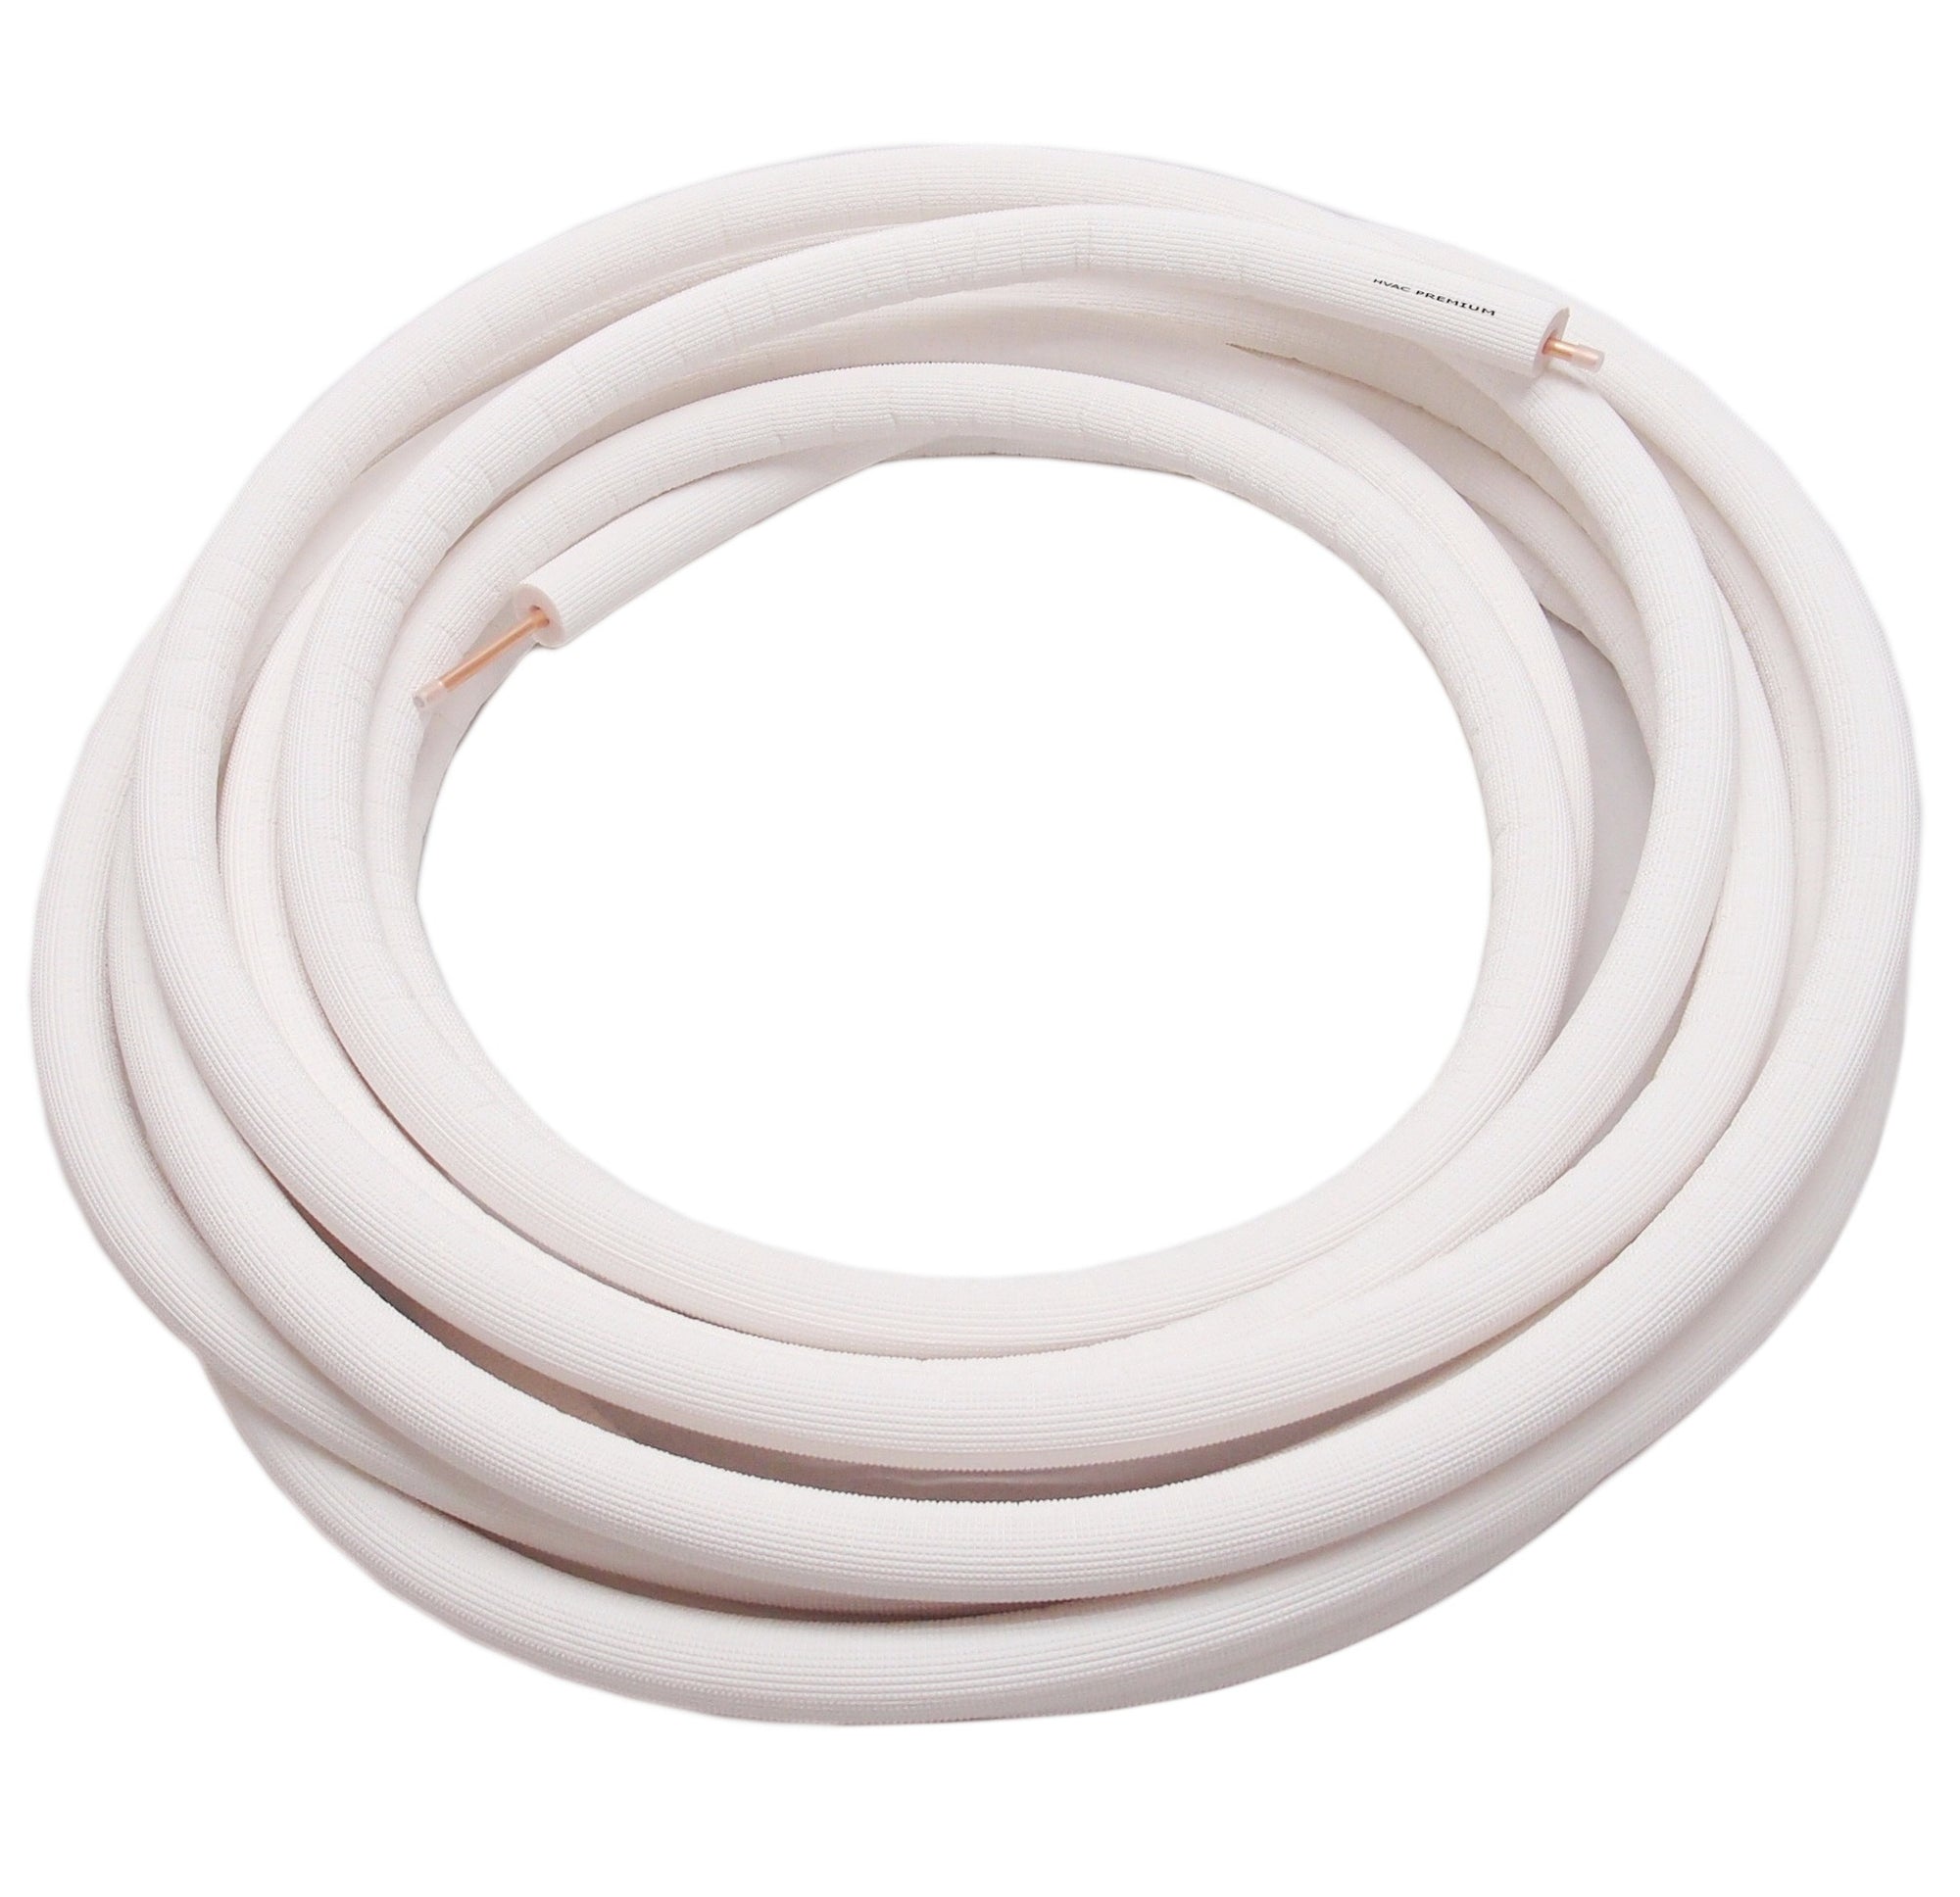 3/8" Insulated Copper Coil Line - Seamless Pipe Tube for HVAC, Refrigerant - 1/2" White Insulation - 35' Long